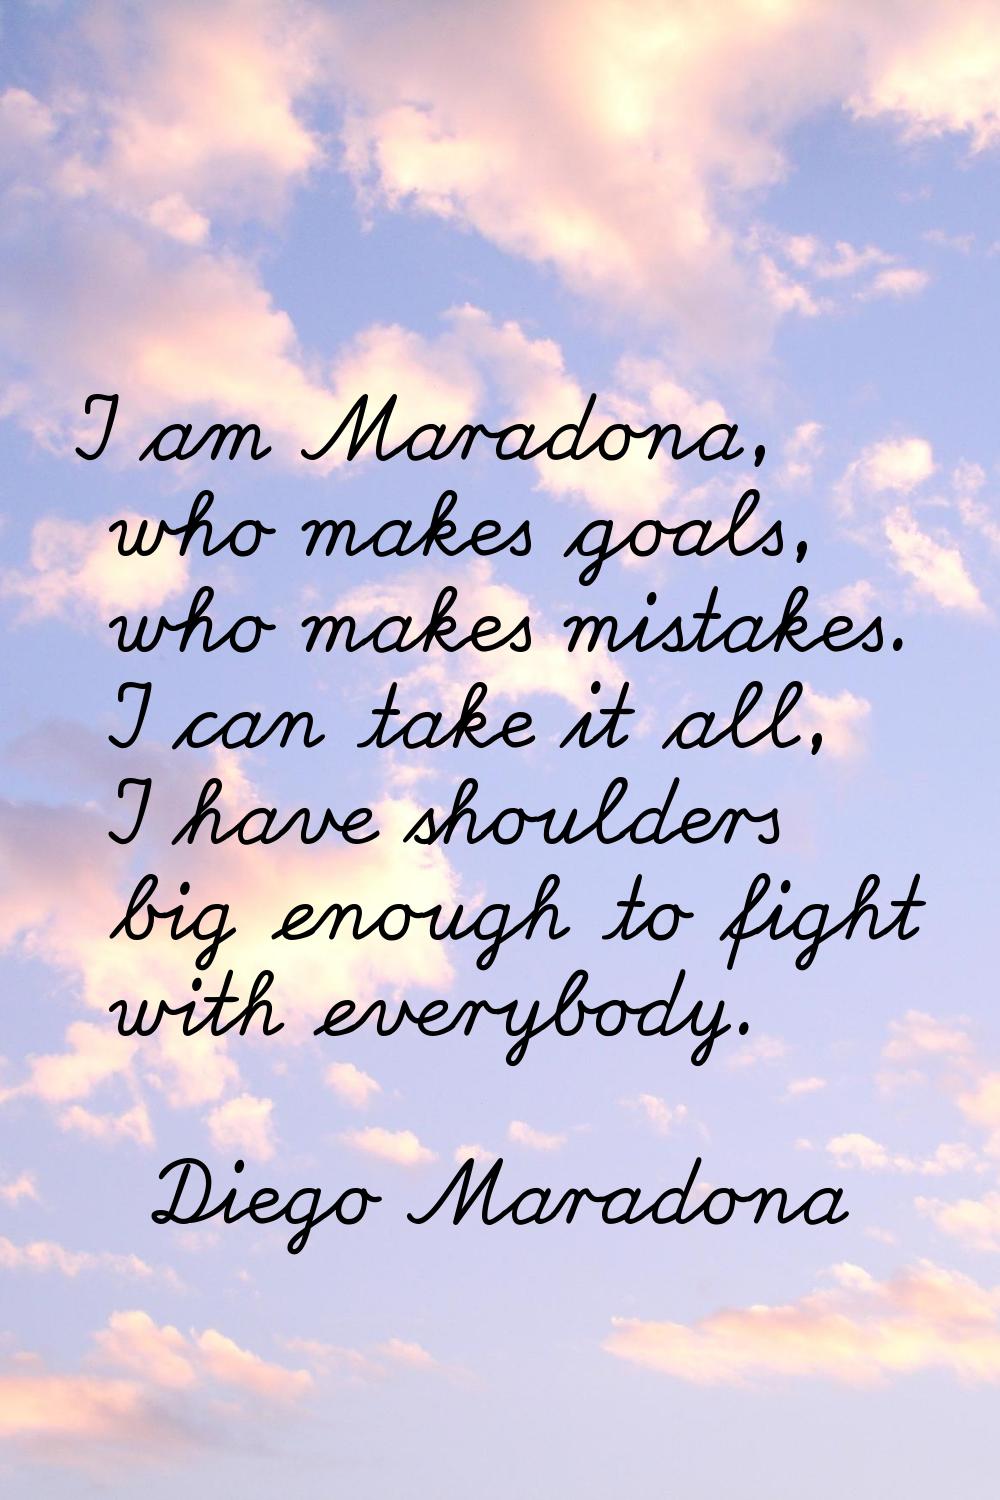 I am Maradona, who makes goals, who makes mistakes. I can take it all, I have shoulders big enough 